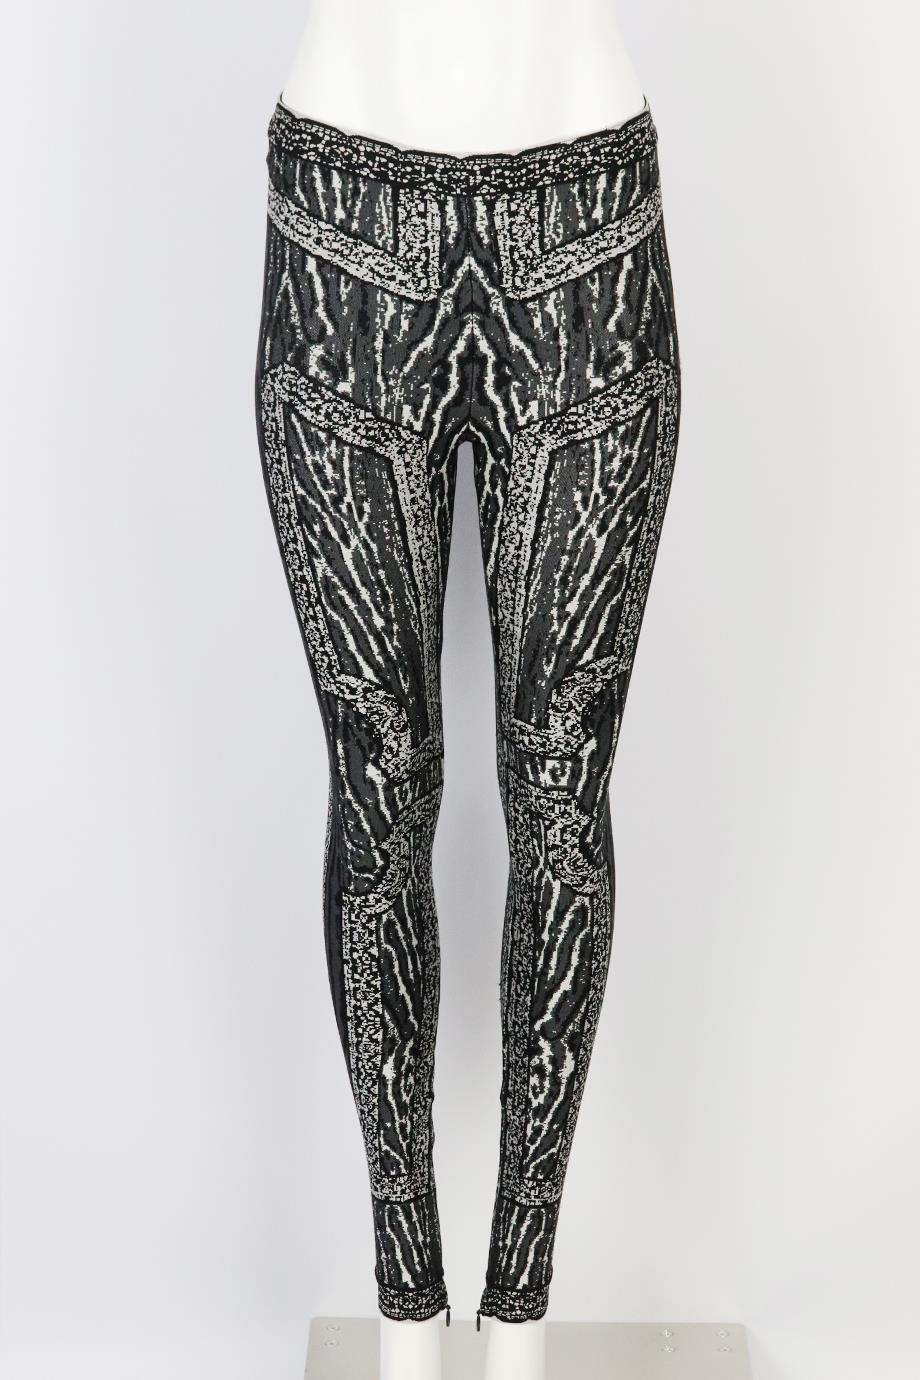 Herve Leger jacquard knit leggings. Grey, silver and black. Pull on. 75% Rayon, 23% nylon, 2% spandex. Size: XSmall (UK 6, US 2, FR 34, IT 38). Waist: 25 in. Hips: 32 in. Length: 37 in. Inseam: 29 in. Rise: 9 in. Very good condition - No sign of